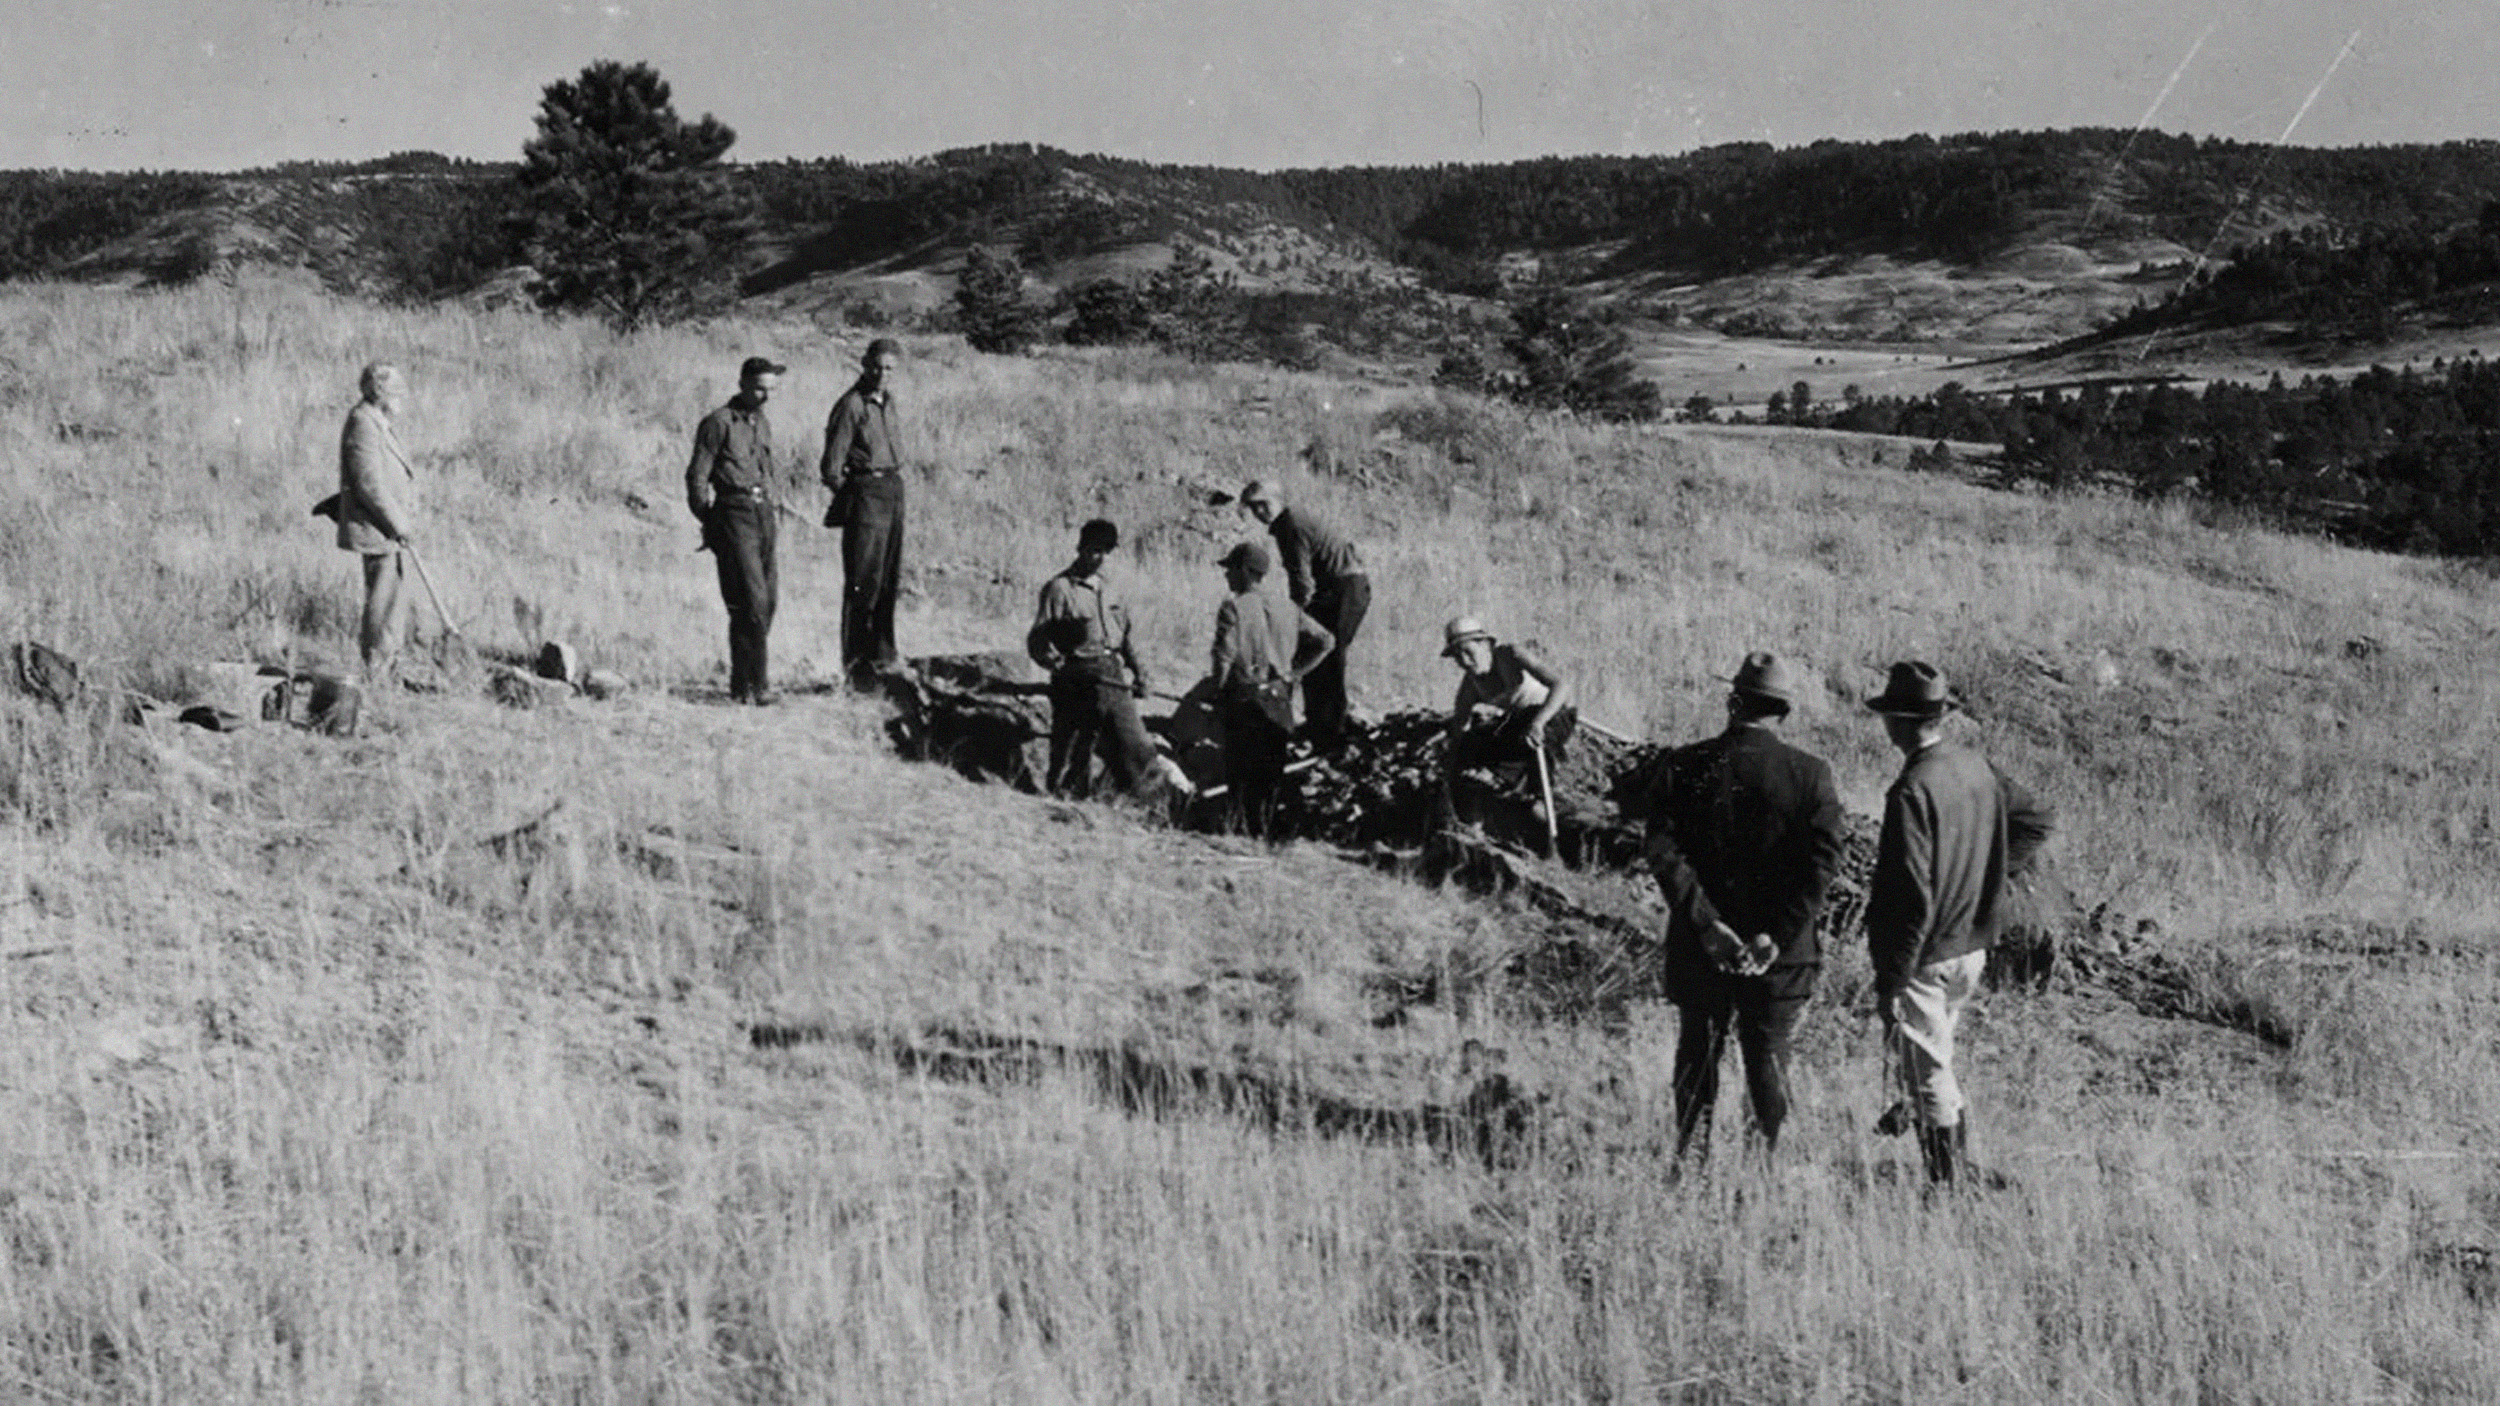 A group of men standing in a grassy area at Fossil Cycad National Monument.